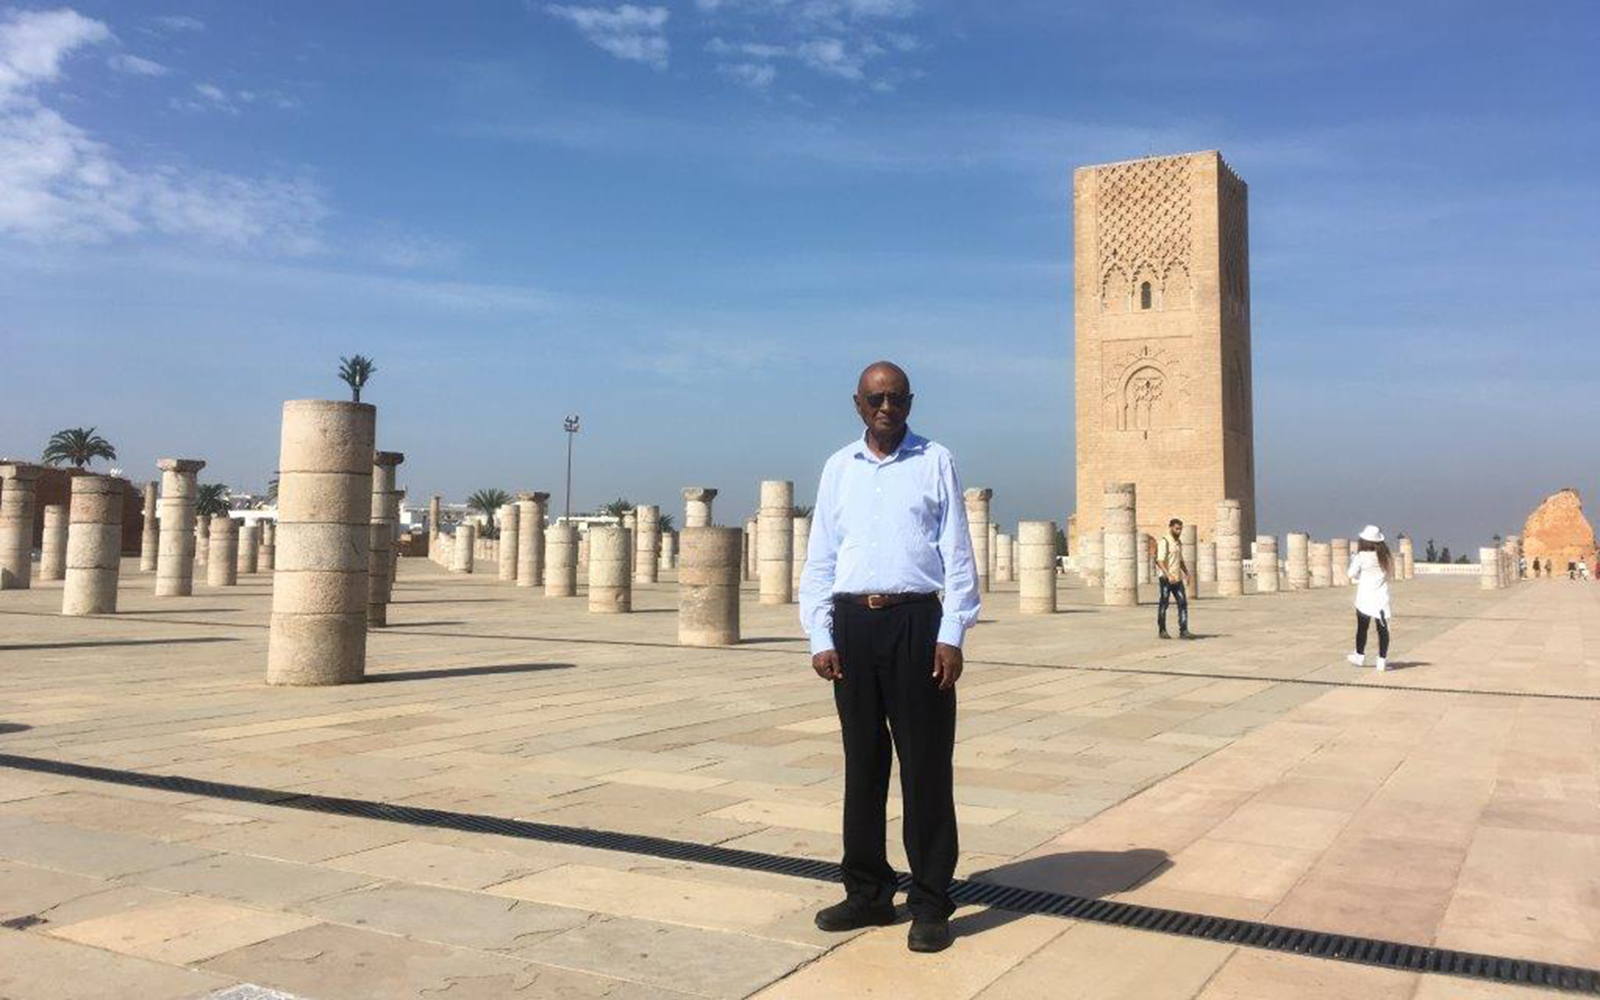 Pictured above, Hussein stands before the Mausoleum of Mohammed V, one of the top tourist attractions in the city of Rabat, both because of its architectural design and its tribute to a famous ruler. (Mo Hussein/UConn School of Business)